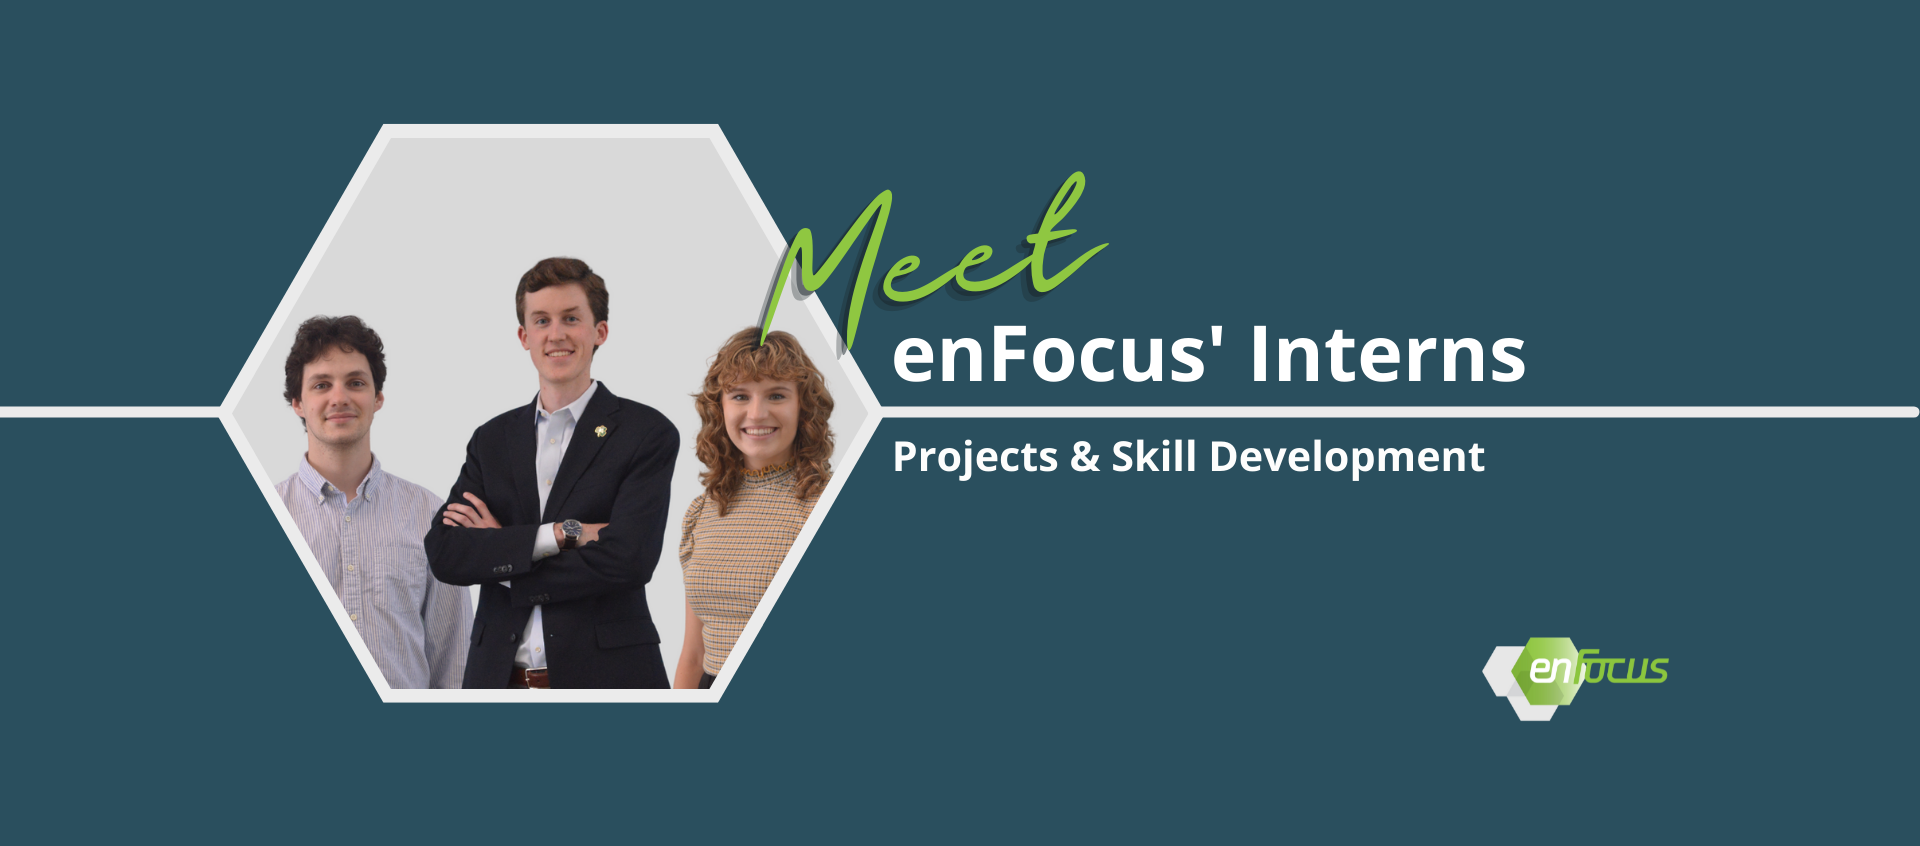 enFocus Interns Lean on Existing Skills While Developing New Ones